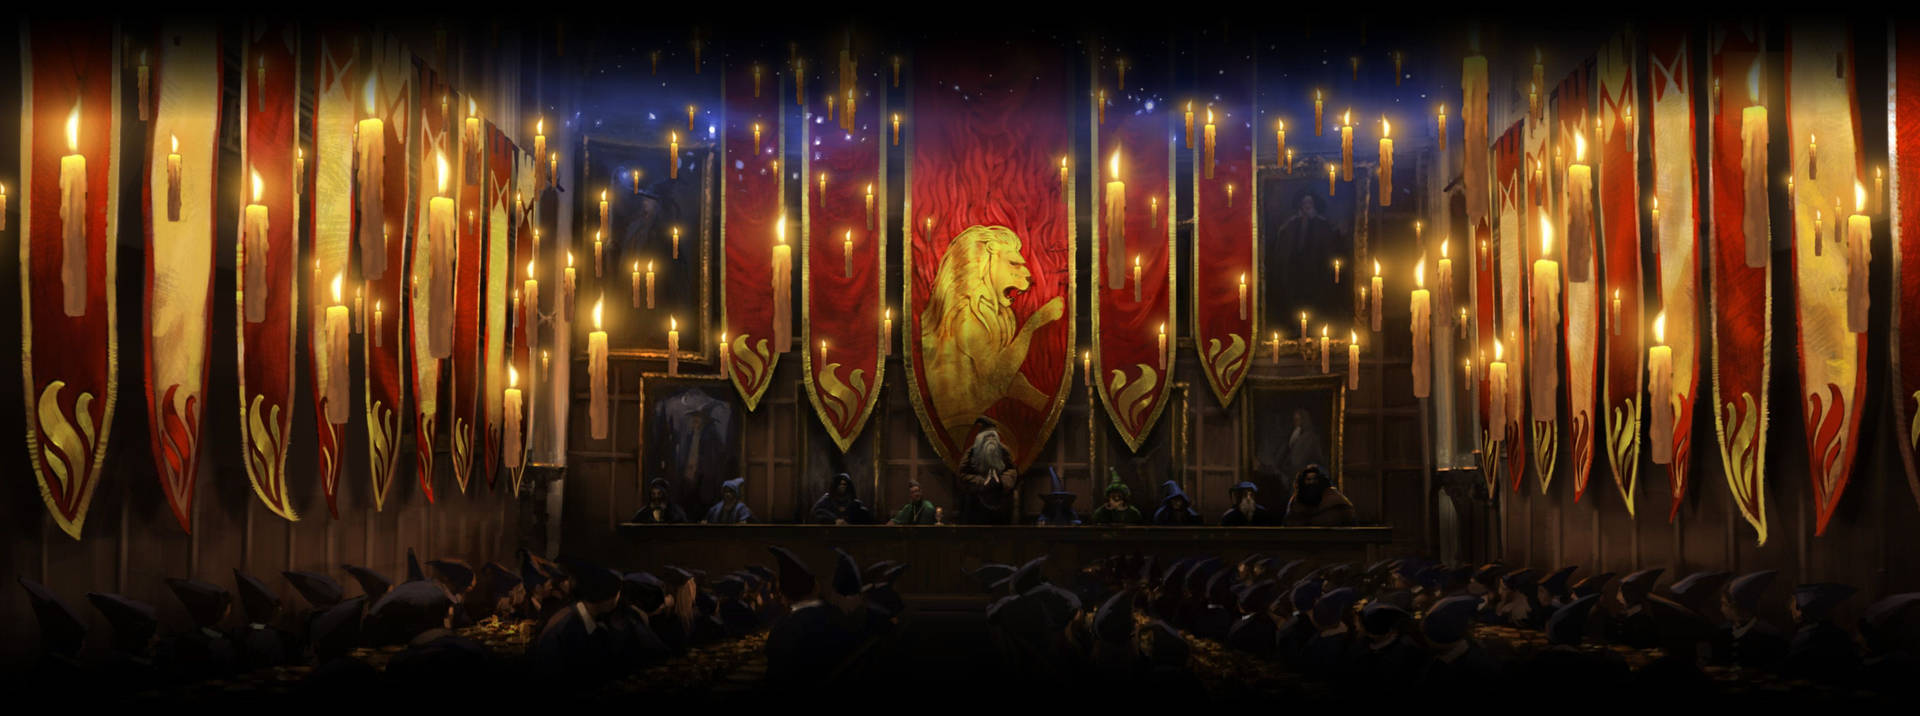 Top 999+ Gryffindor Wallpaper Full HD, 4K✅Free to Use